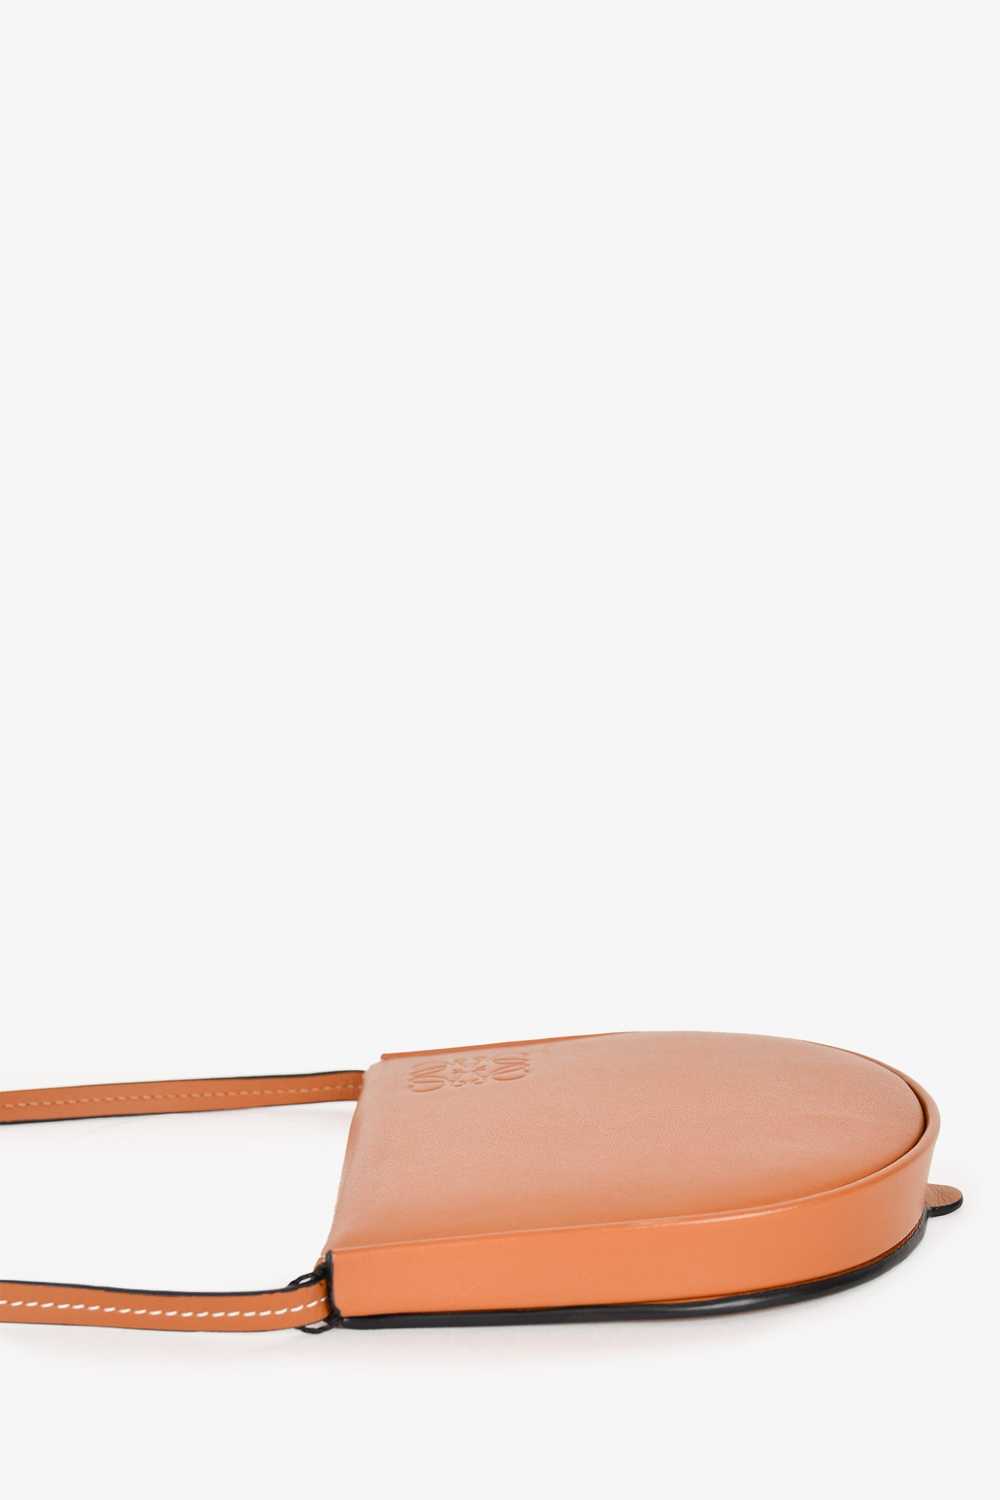 Loewe Brown Leather Small 'Heel' Crossbody Pouch - image 4